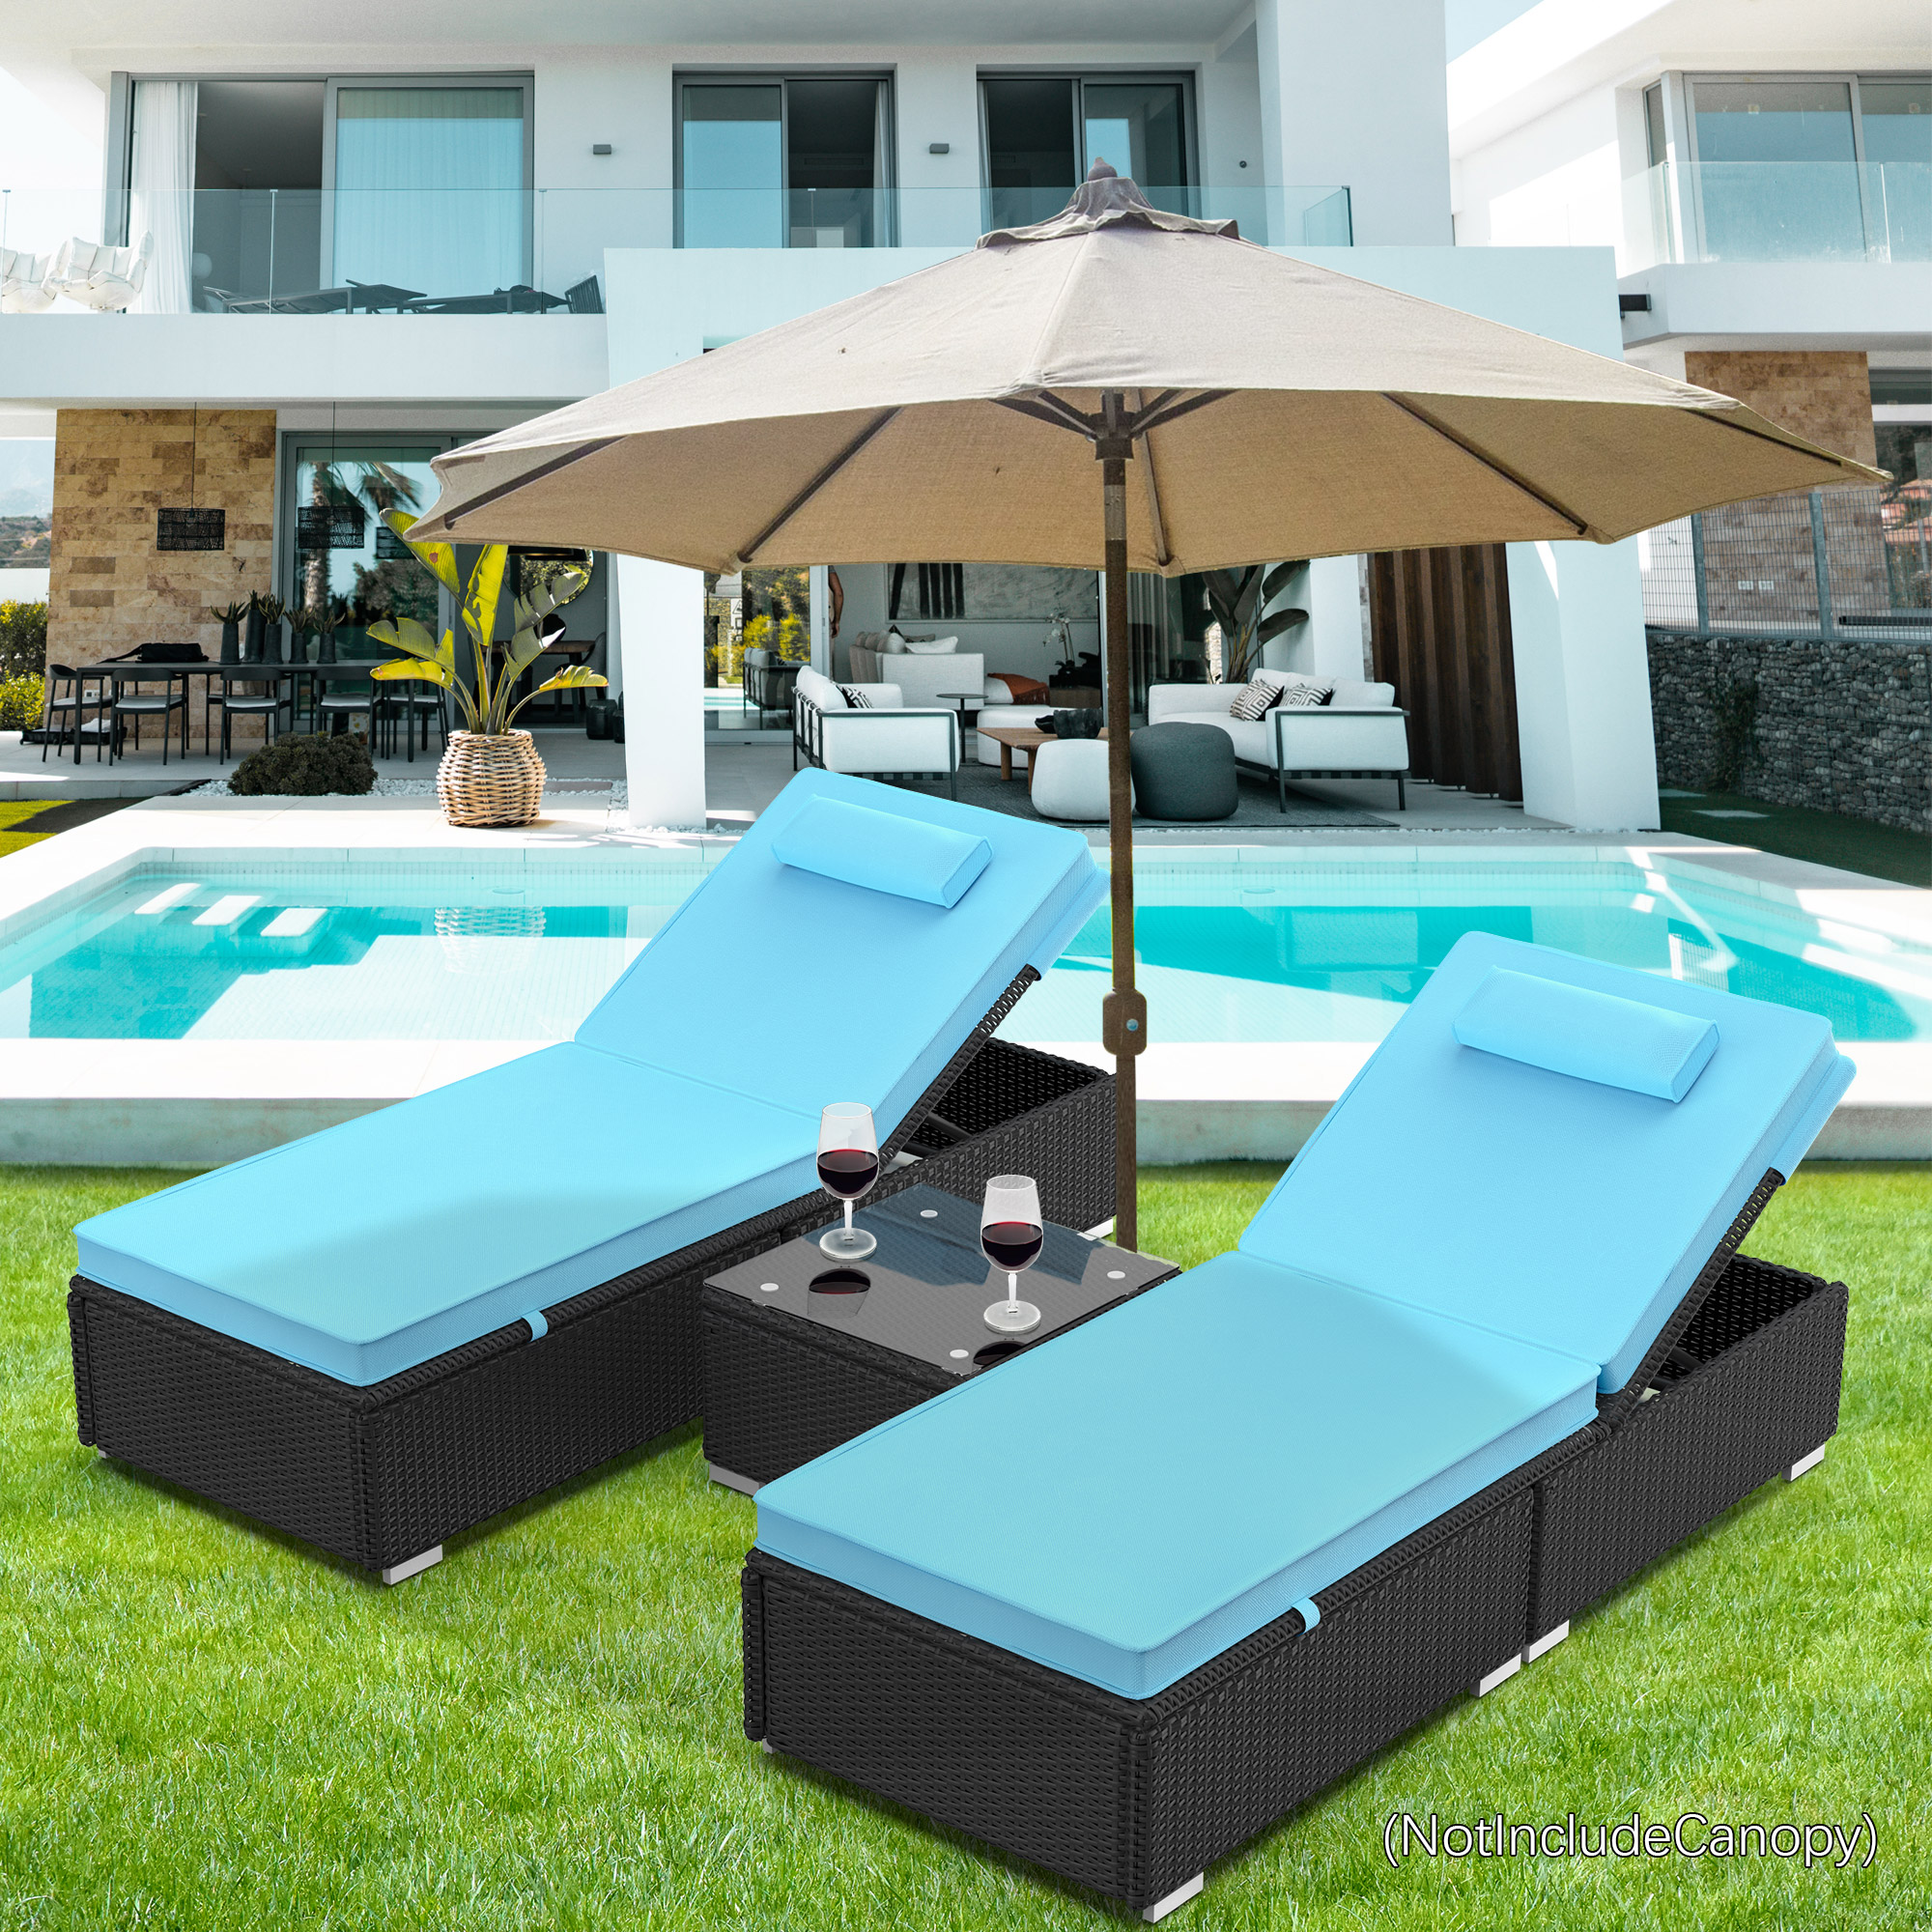 Segmart 3 Pieces Reclining Outdoor Patio Lounge Furniture Set, All-Weather Poolside Rattan Wicker Chaise Chairs Sets with Cushions & 2 Pillows, for Backyard Deck Porch Garden, SS2116 - image 1 of 13